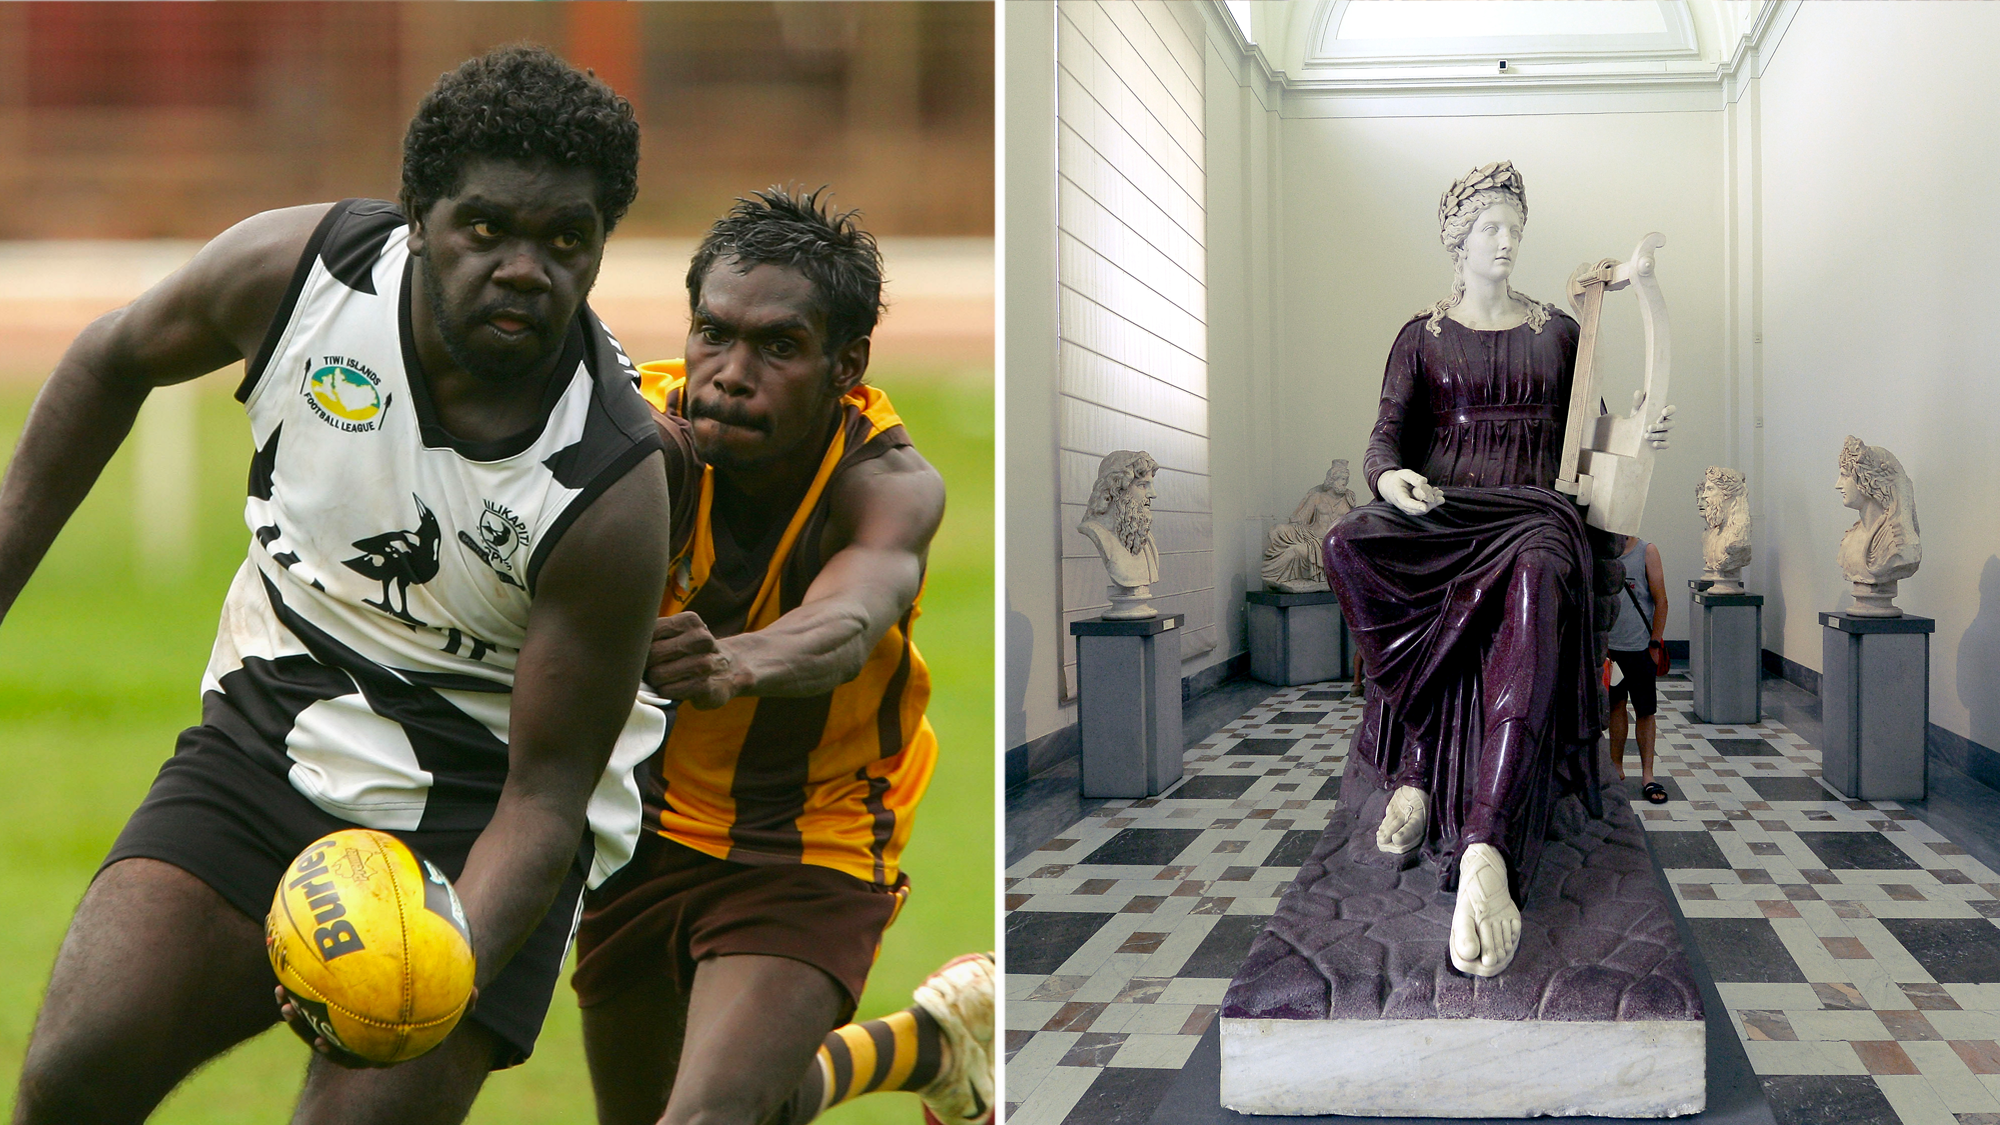 The Muluwurri Magpies from Melville Island (in black and white) play against the Tapalinga Super Stars in a game of Australian Rules football;  The Farnese Collection at Museo Archeologico Nazionale in Naples. 